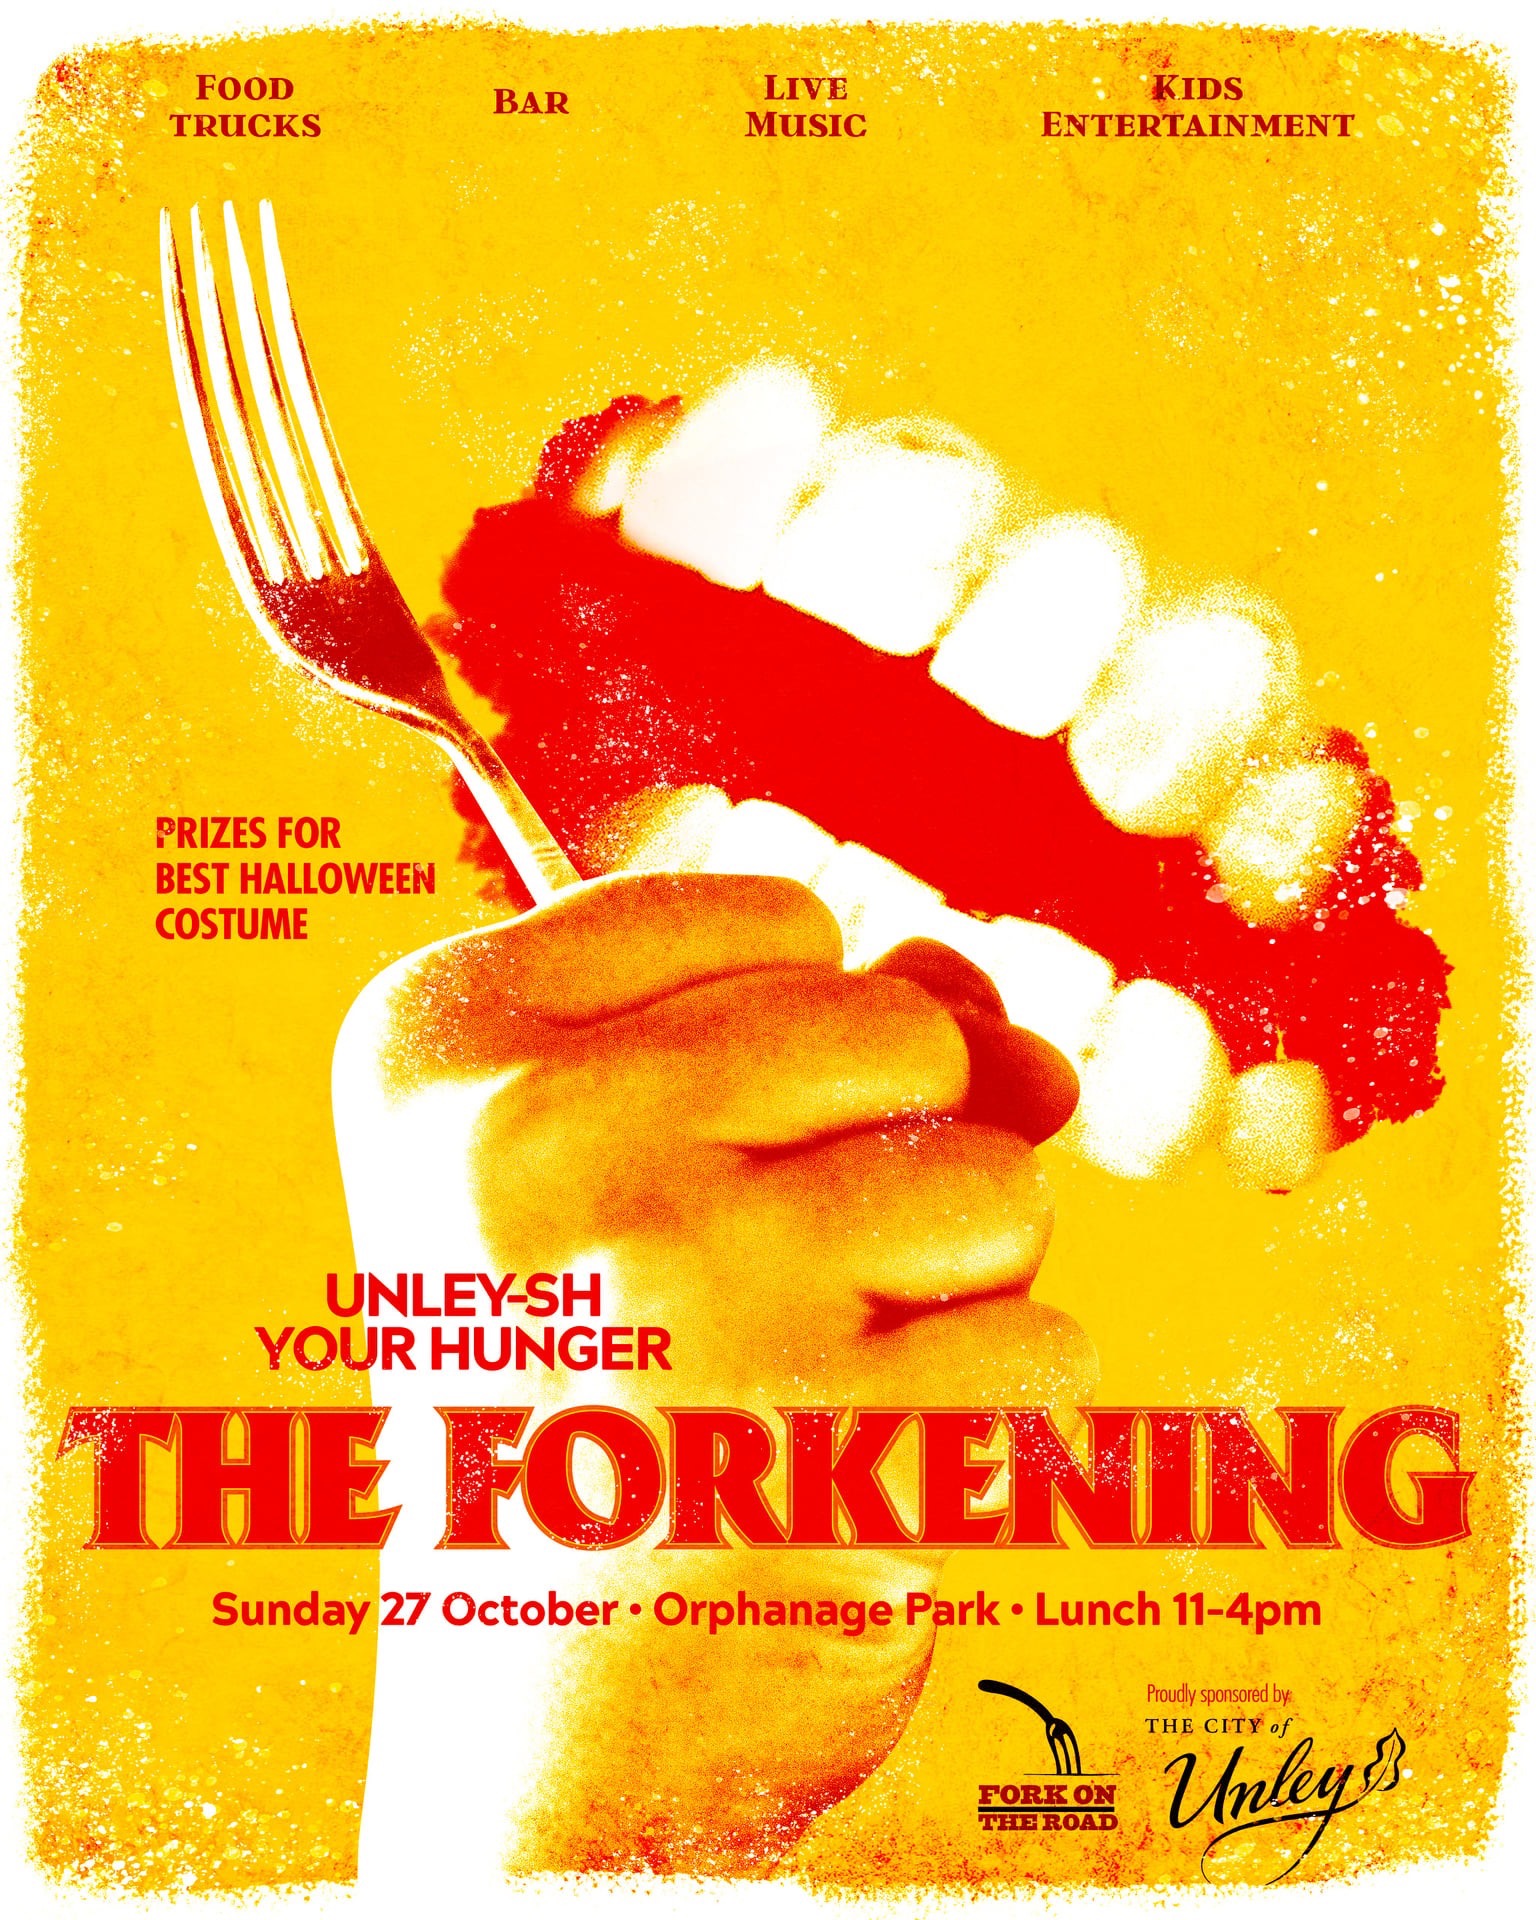 The Forkening- Unley-sh Your Hunger!